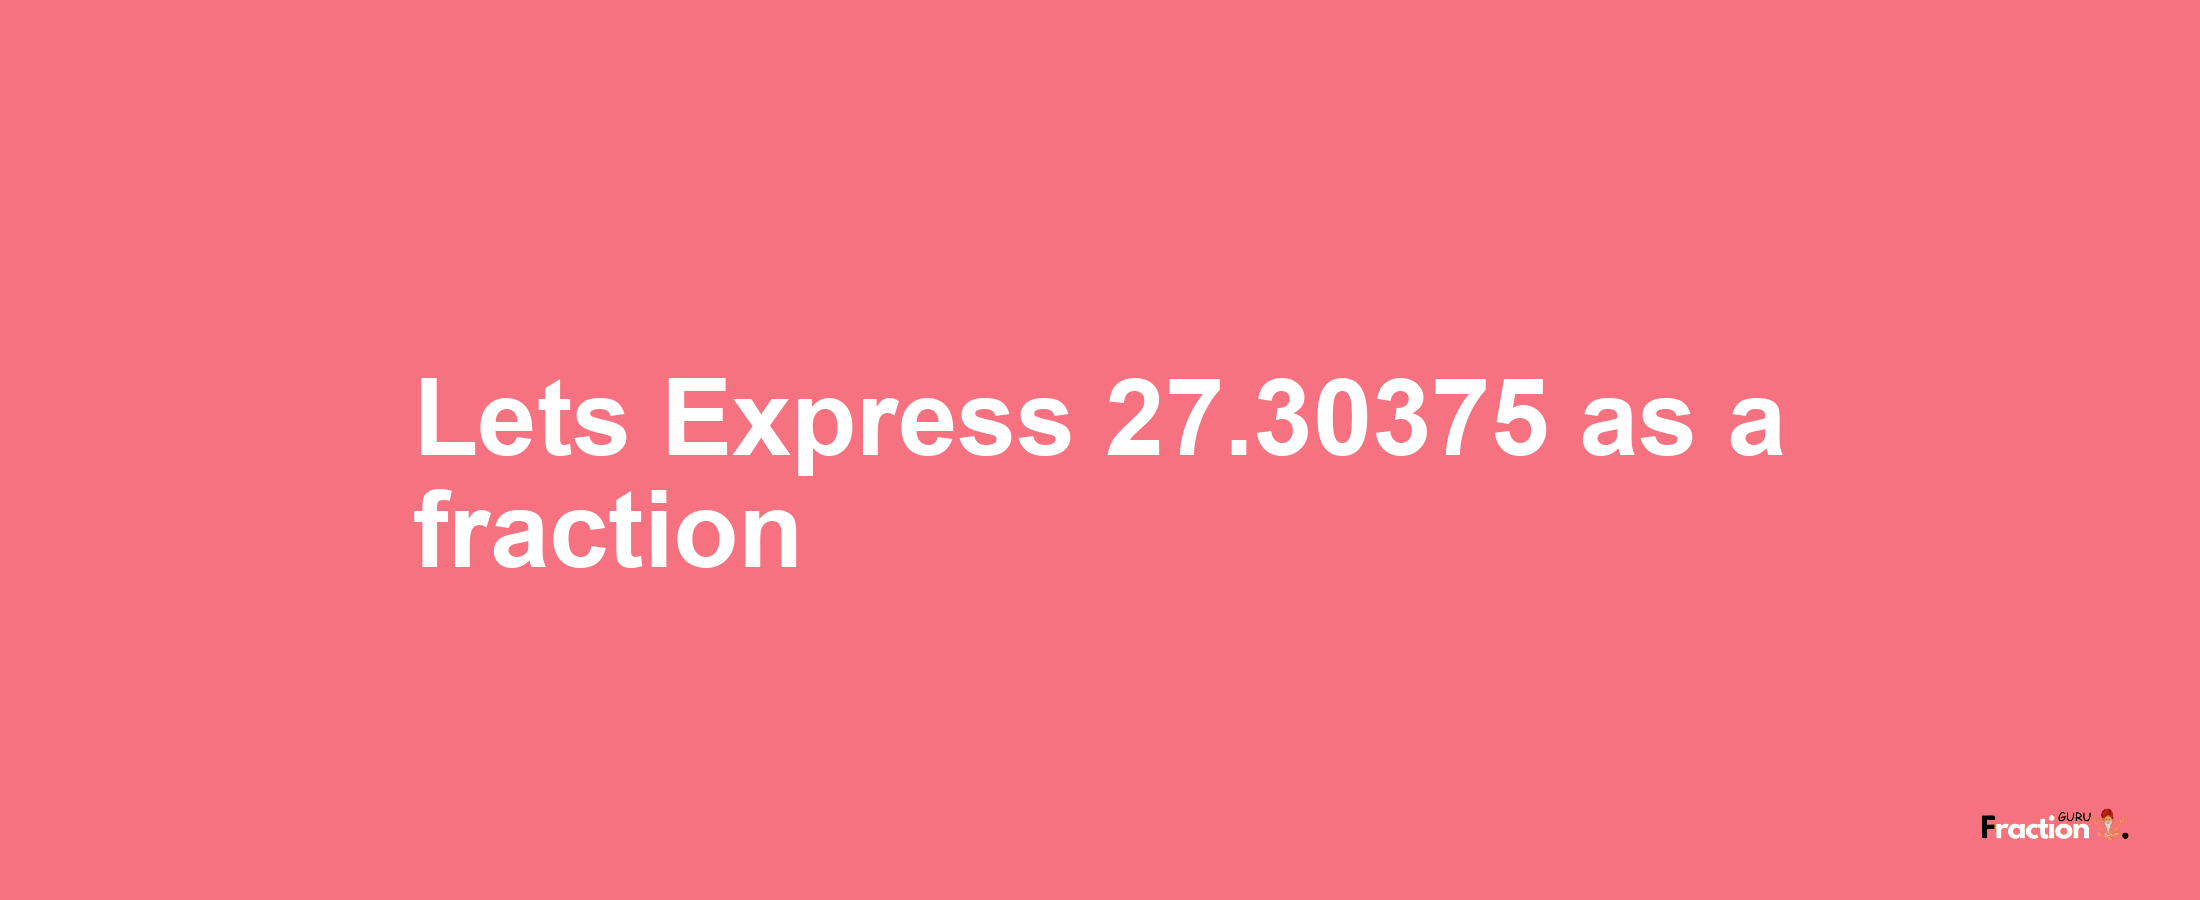 Lets Express 27.30375 as afraction